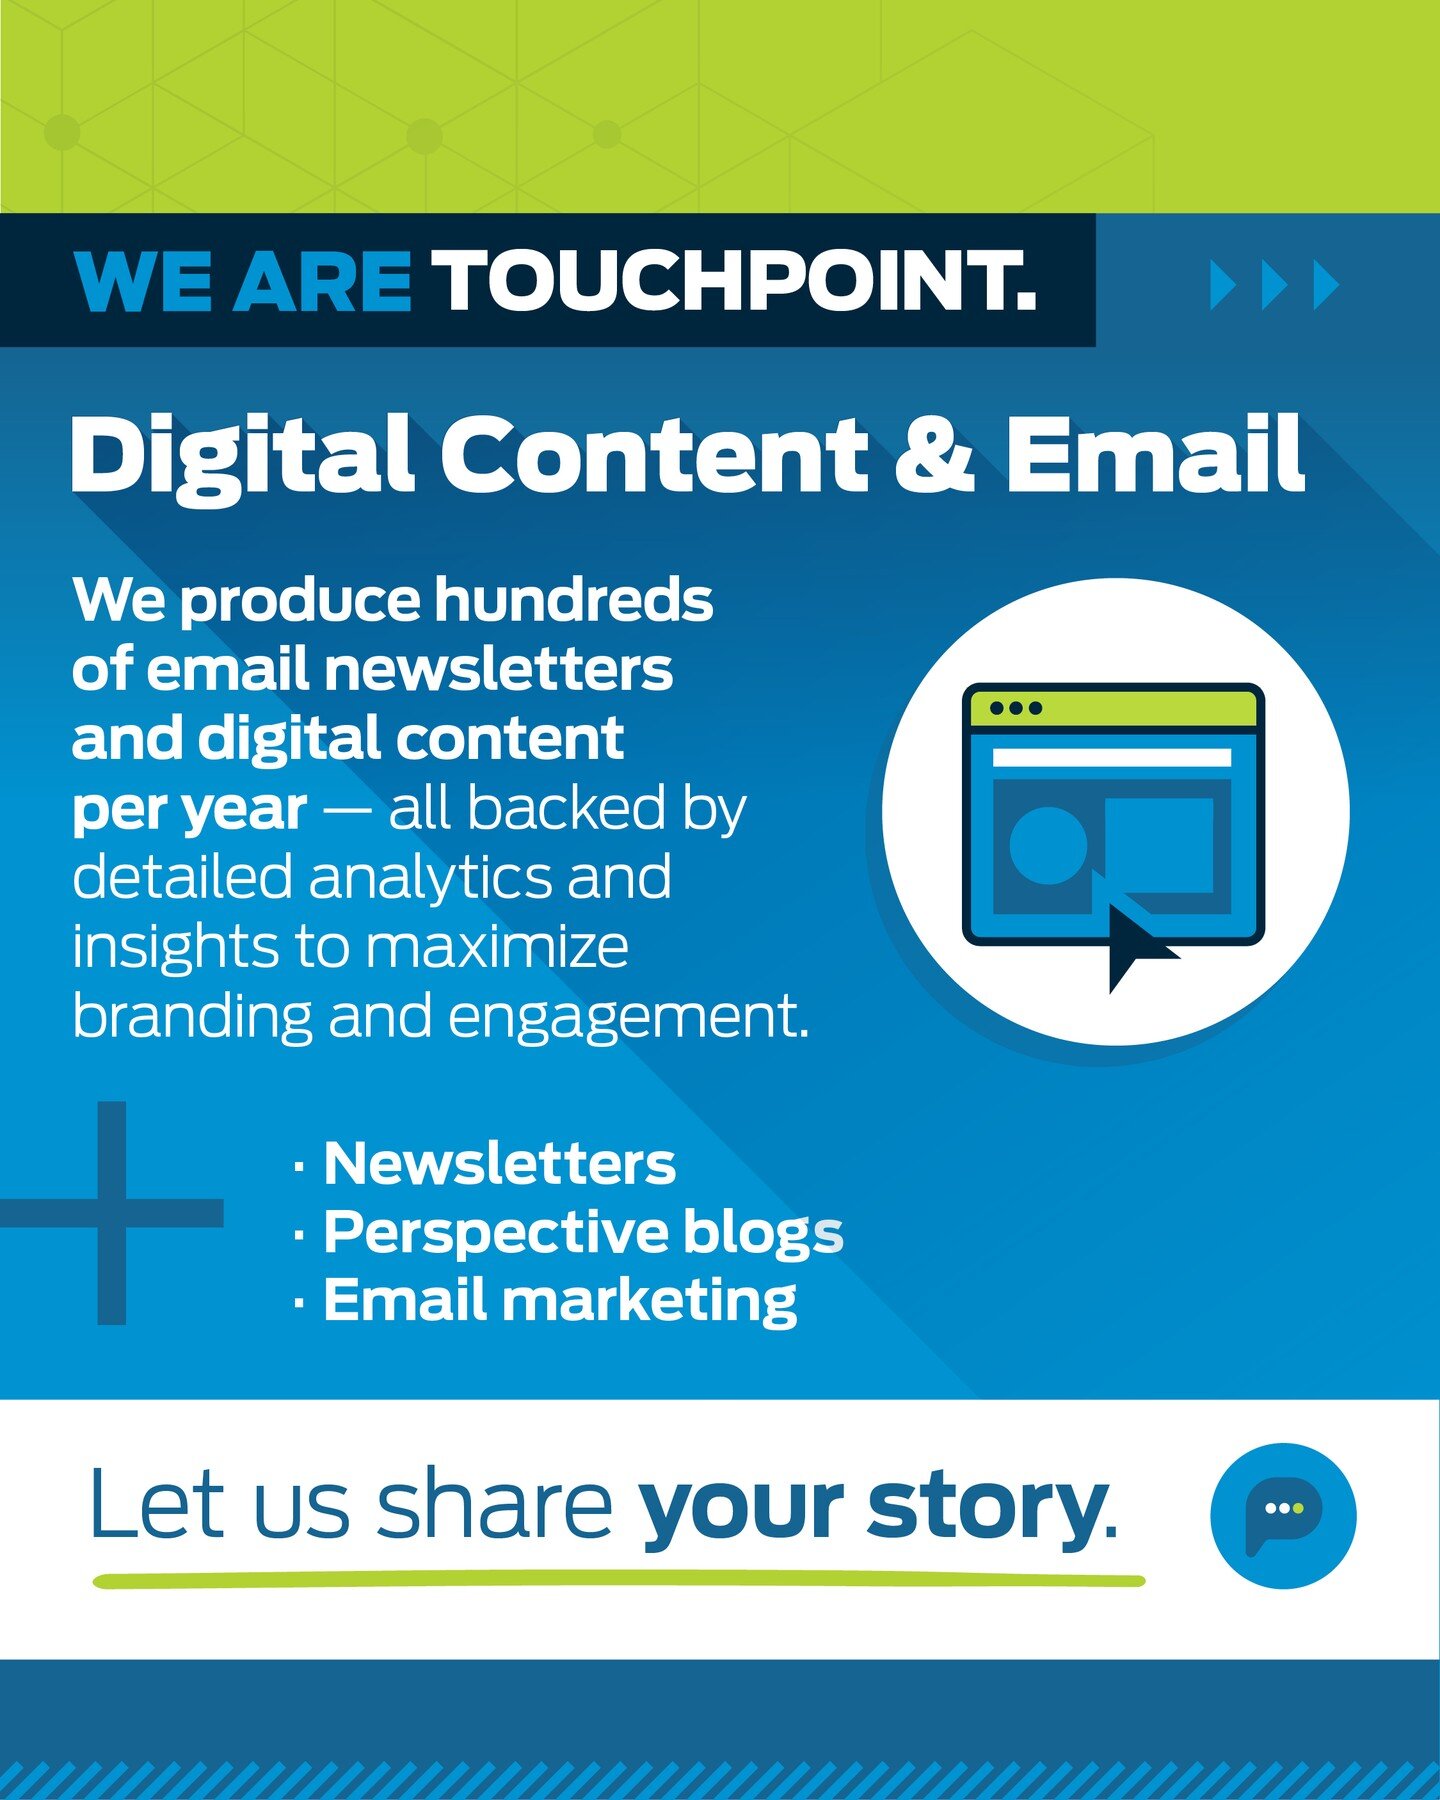 We produce hundreds of email newsletters and digital content per year - all backed by detailed analytics and insights to maximize branding and engagement.

To see some of our digital content, visit our website or email laura@touchpointmedia.com to ge